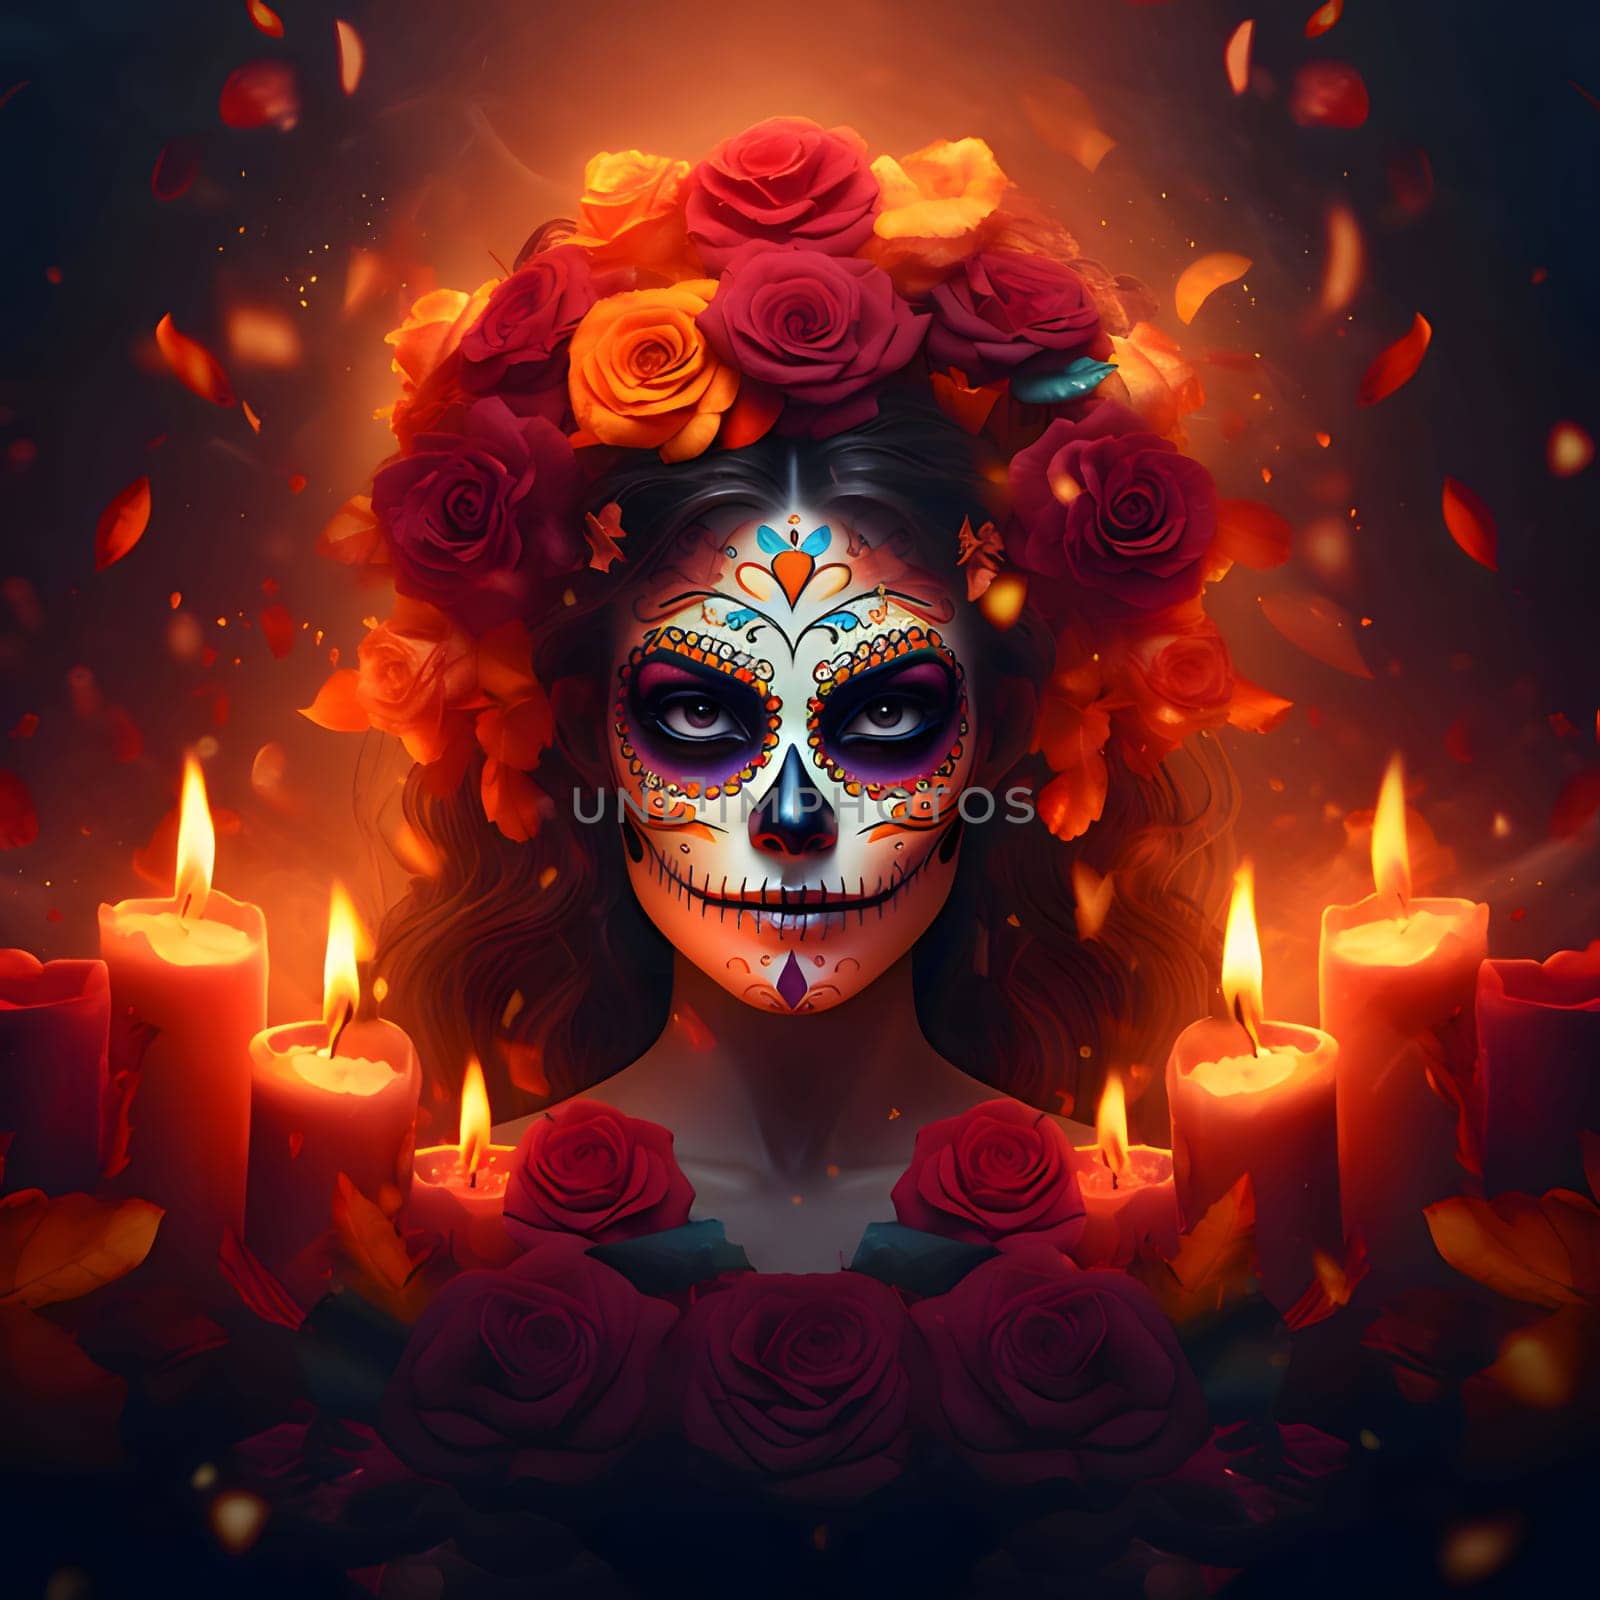 Dark painted face of a woman with sewn lips, head decorated with colorful roses, candles all around For the day of the dead and Halloween. Atmosphere of death and solemnity.